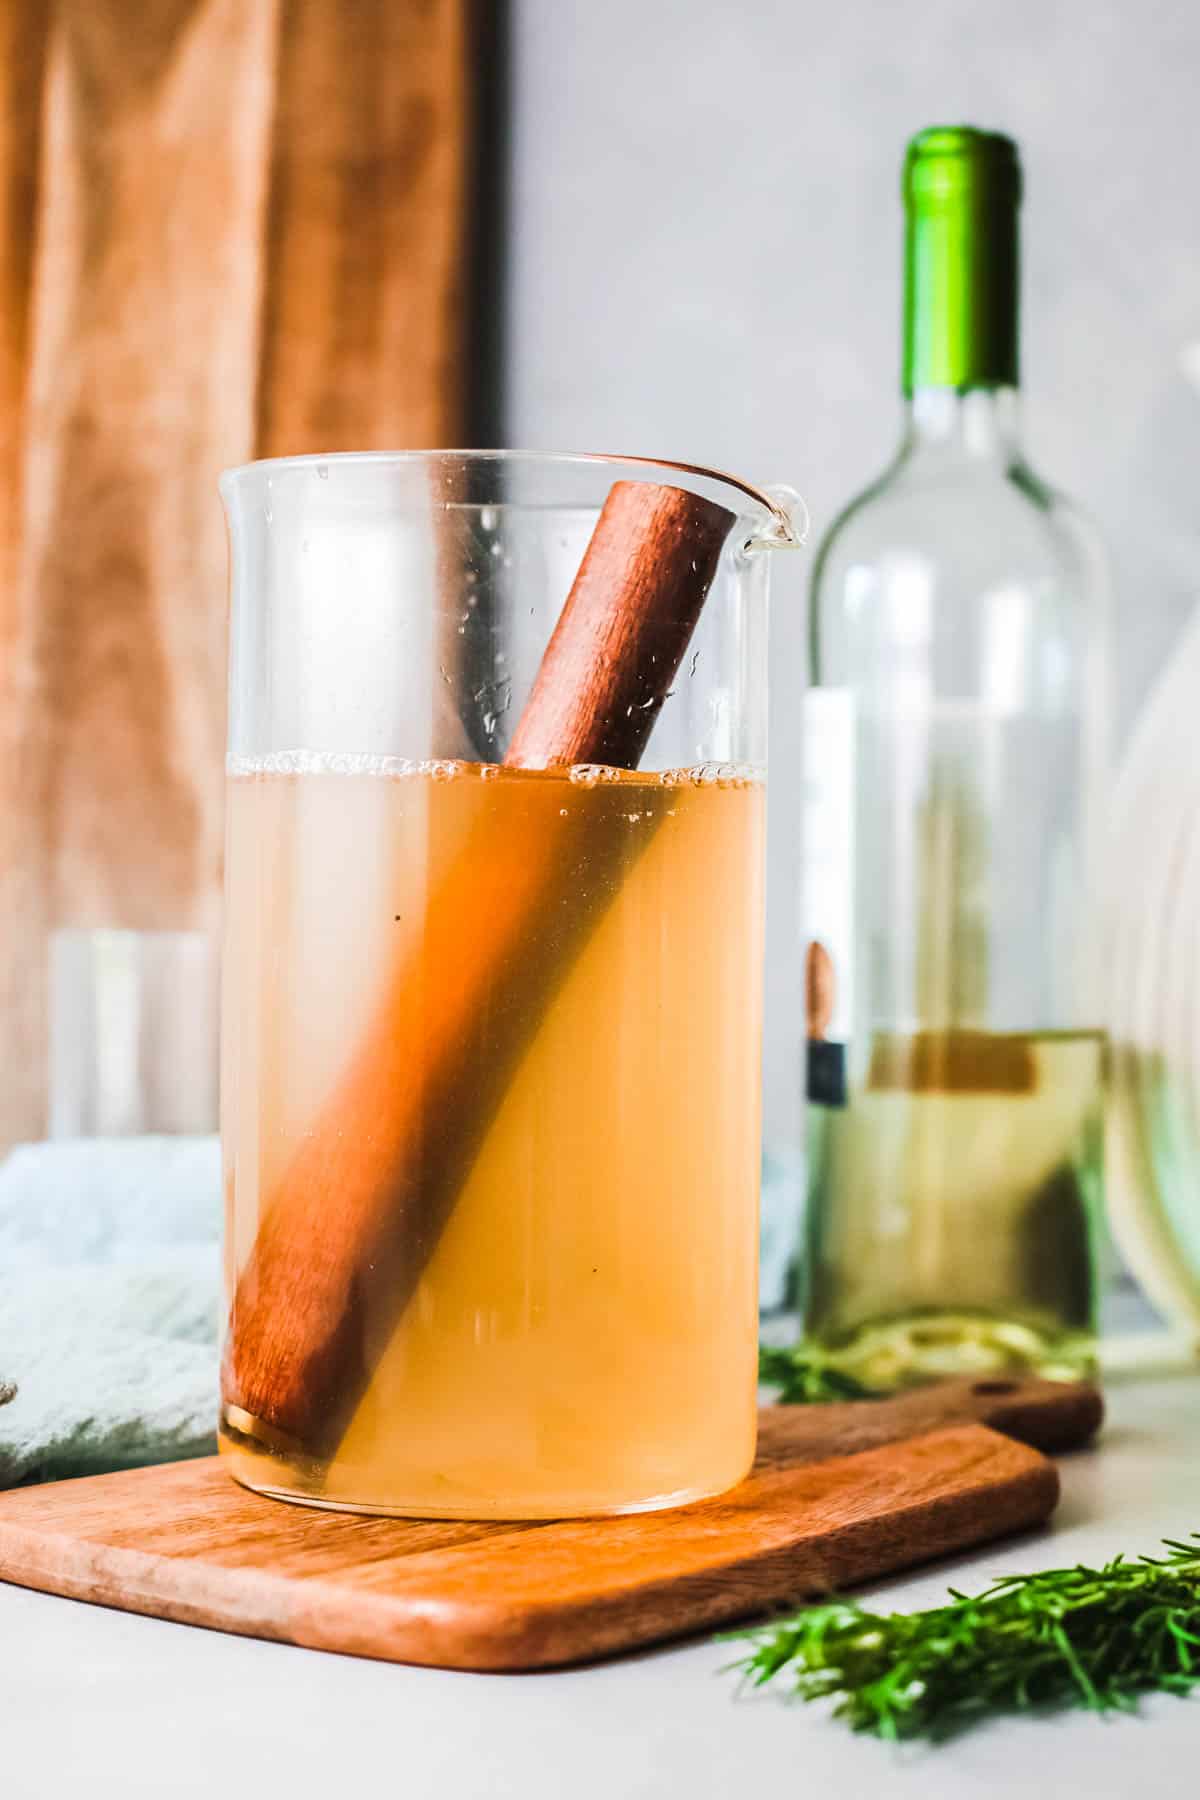 A glass cocktail pitcher on a wooden board on a table with a wooden muddler in the amber colored sangria.